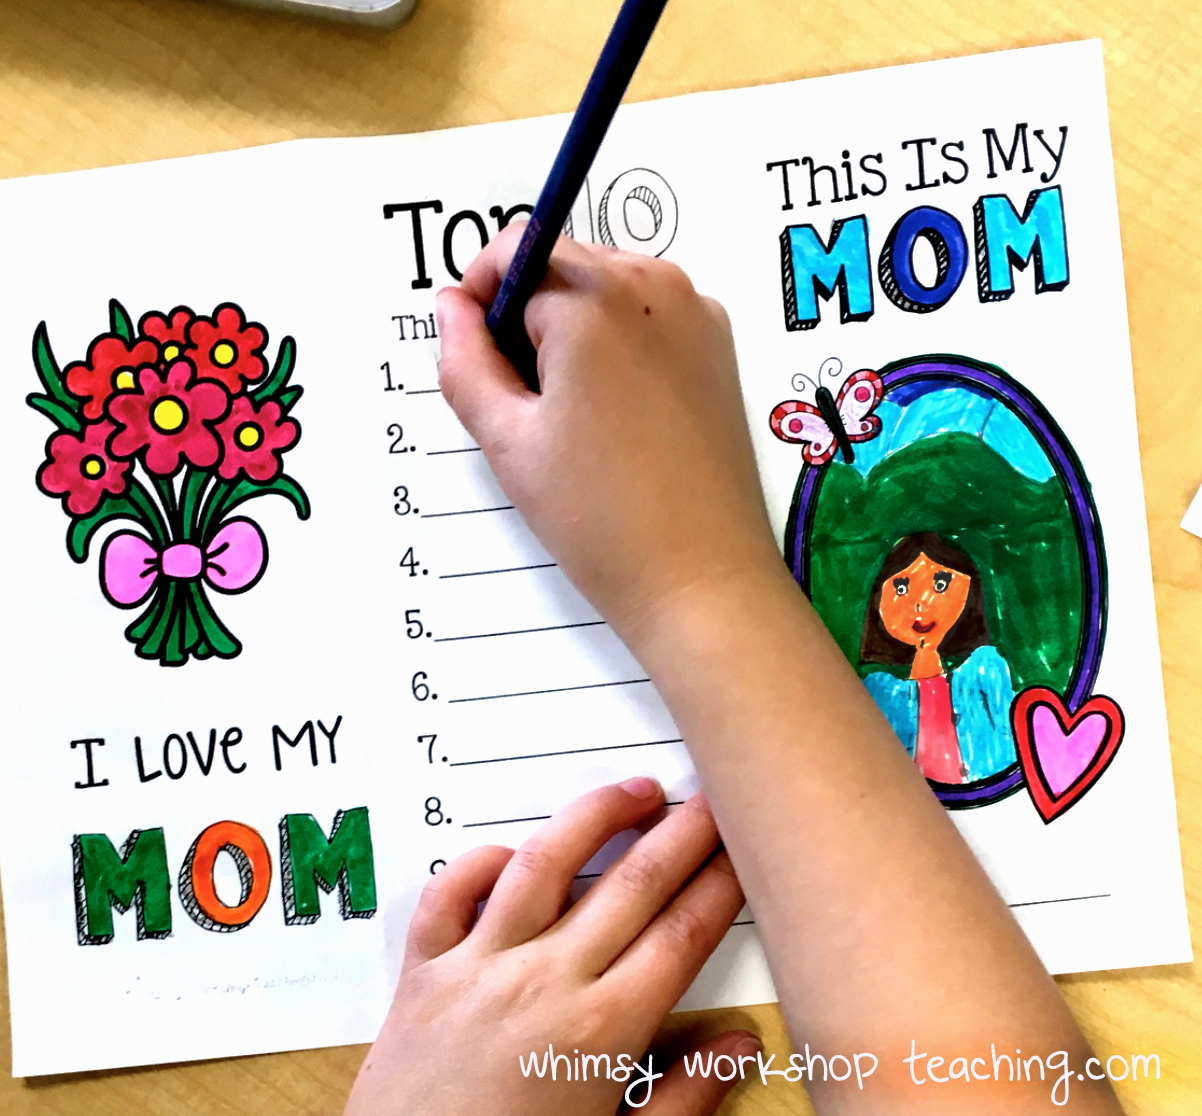 25 Classroom Tested Mother's Day Ideas - Whimsy Workshop Teaching